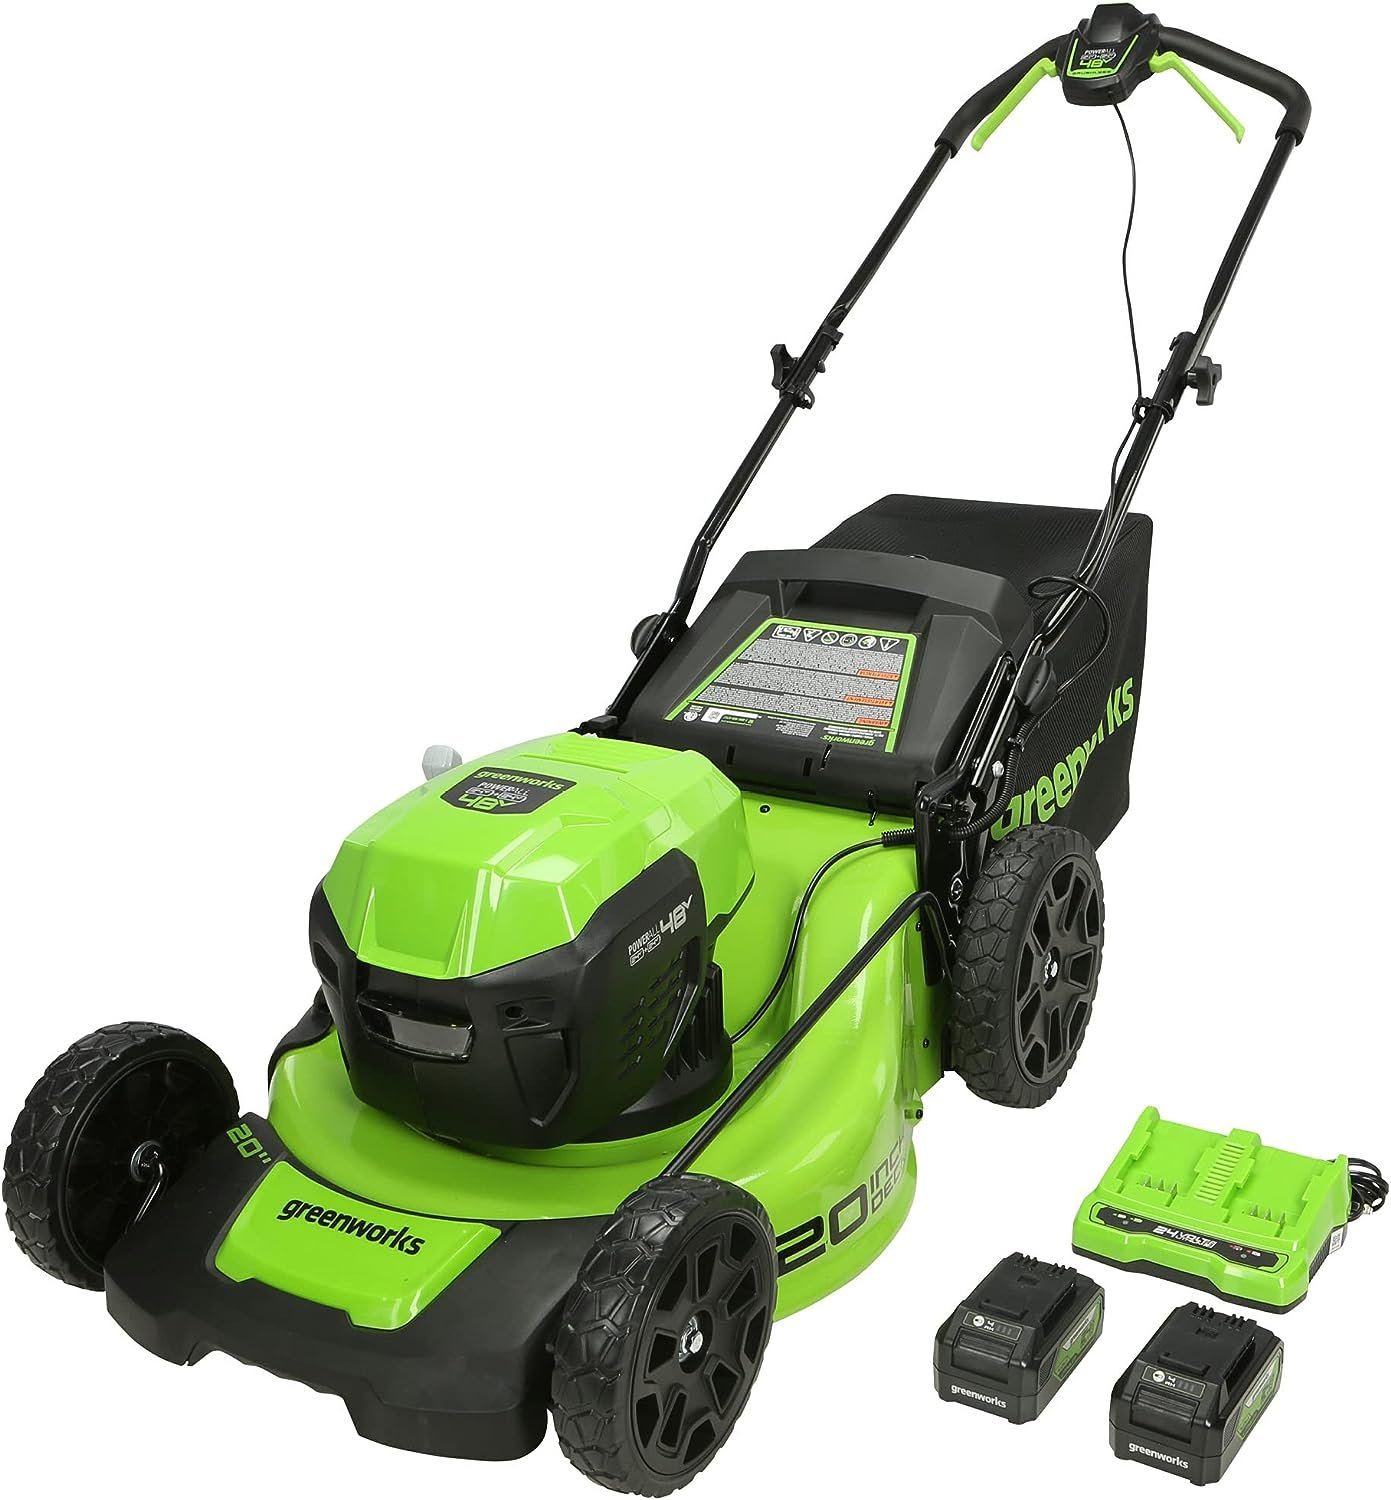 Greenworks Push Lawn Mower Review